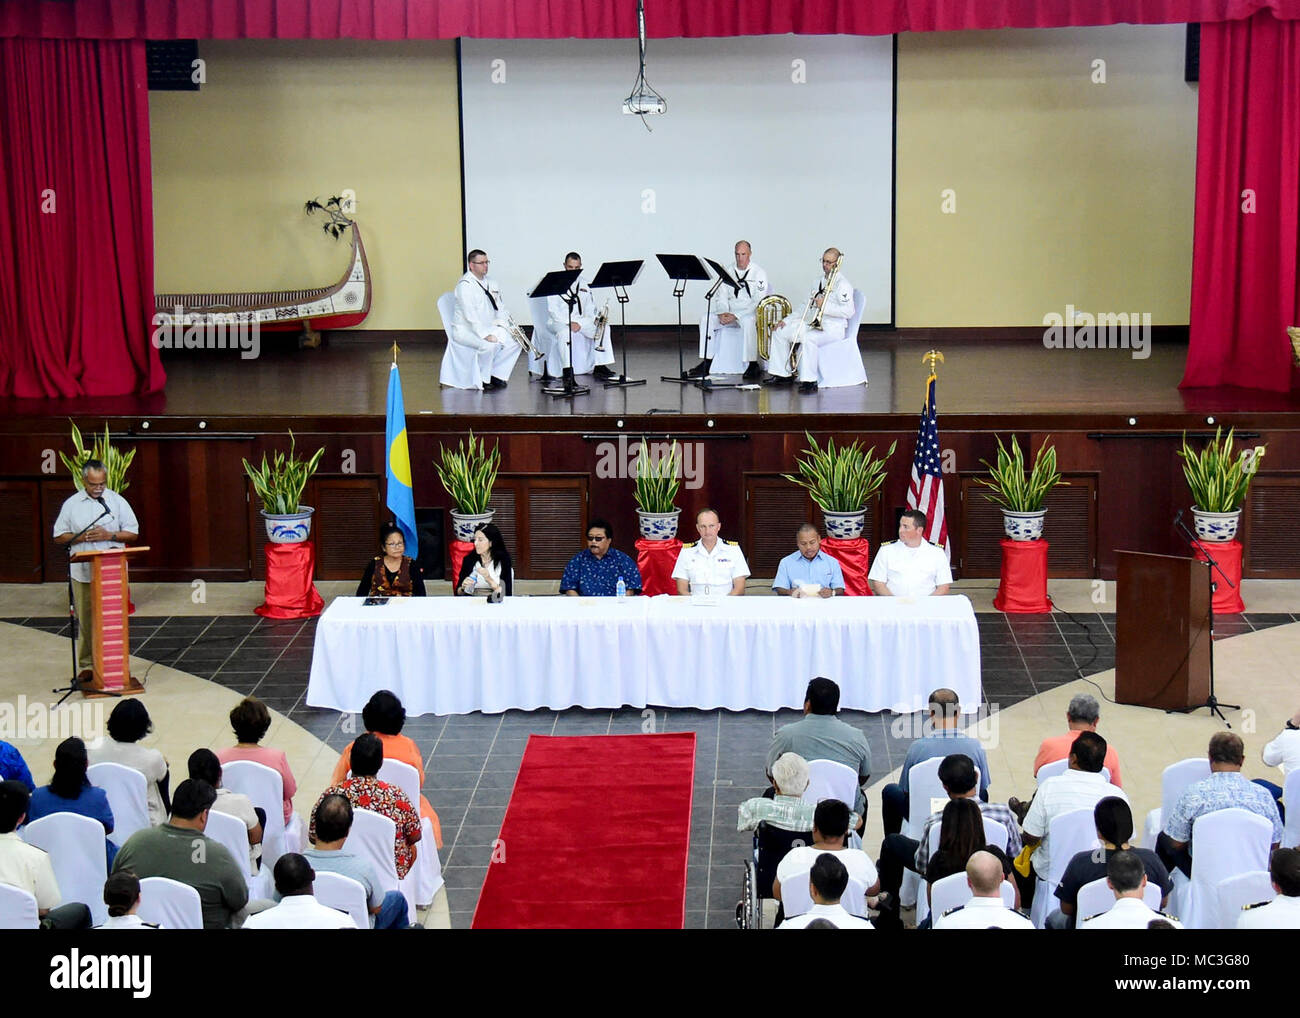 KOROR, Republic of Palau (April 4, 2018) Distinguished attendees sit at the head table during the opening ceremony of Pacific Partnership 2018 (PP18) mission stop Palau April 4. The distinguished attendees included the Honorable Raynold B. Oilouch, Vice President of Palau, the Honorable Faustina Rehuher Marugg, Minister of State of Palau, Paramount Chief Ibedul Yataka M. Gibbons, the Honorable Amy Hyatt, U.S. Ambassador to Palau, Capt. Peter Olive, deputy mission commmander of Pacific Partnership 2018, and Capt. Charles Black, commanding officer of USNS Brunswick. PP18's mission is to work col Stock Photo